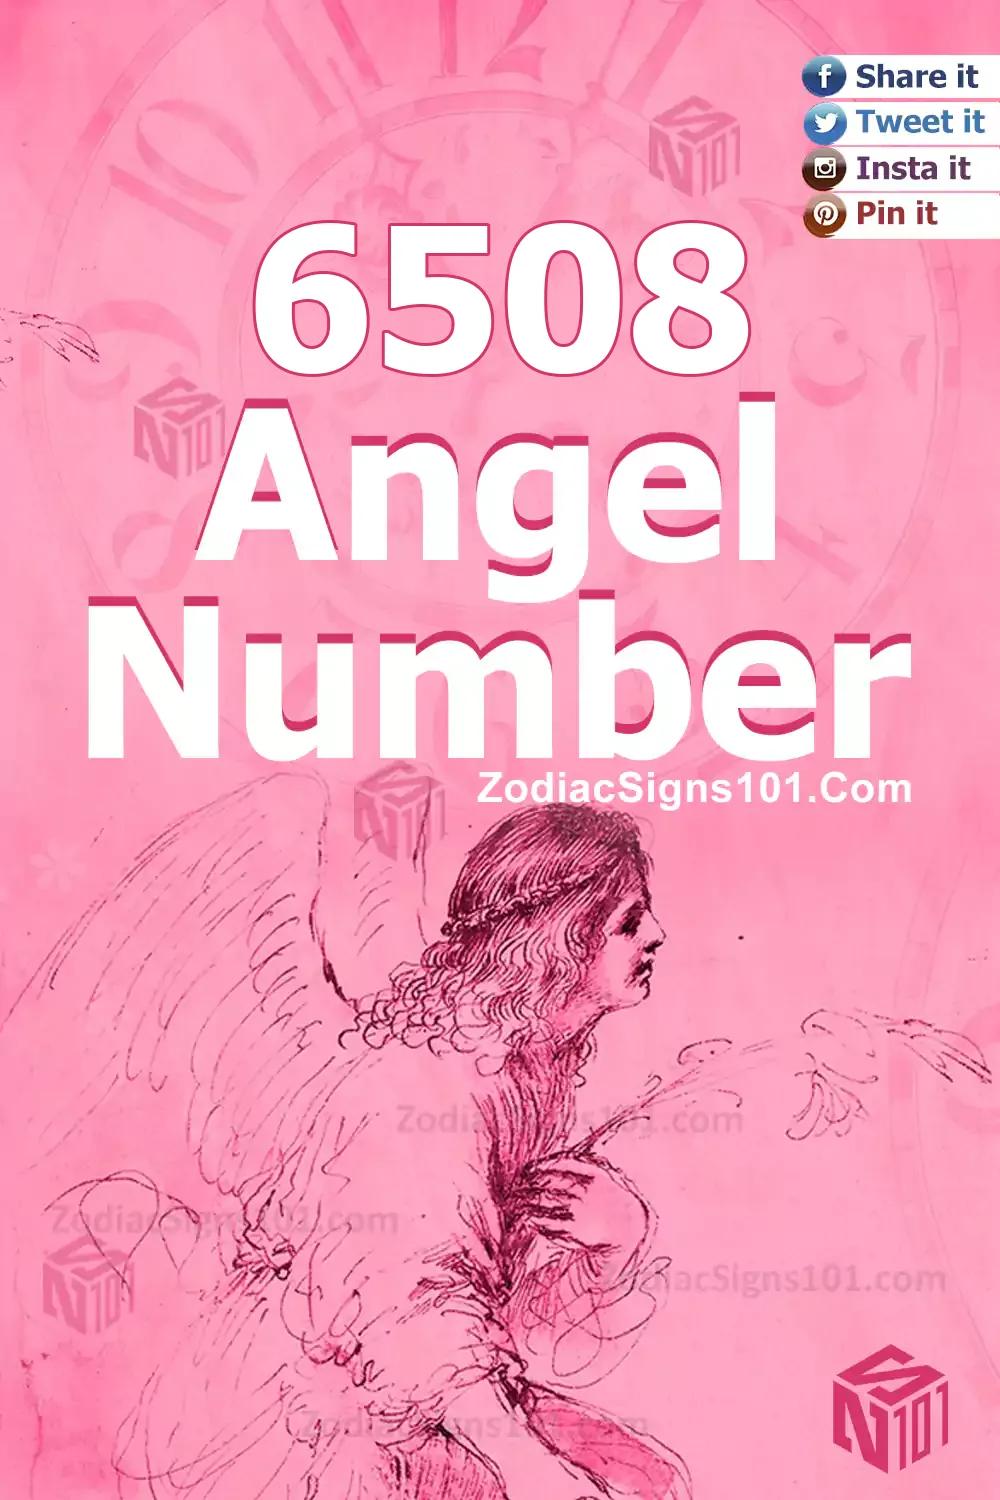 6508 Angel Number Meaning